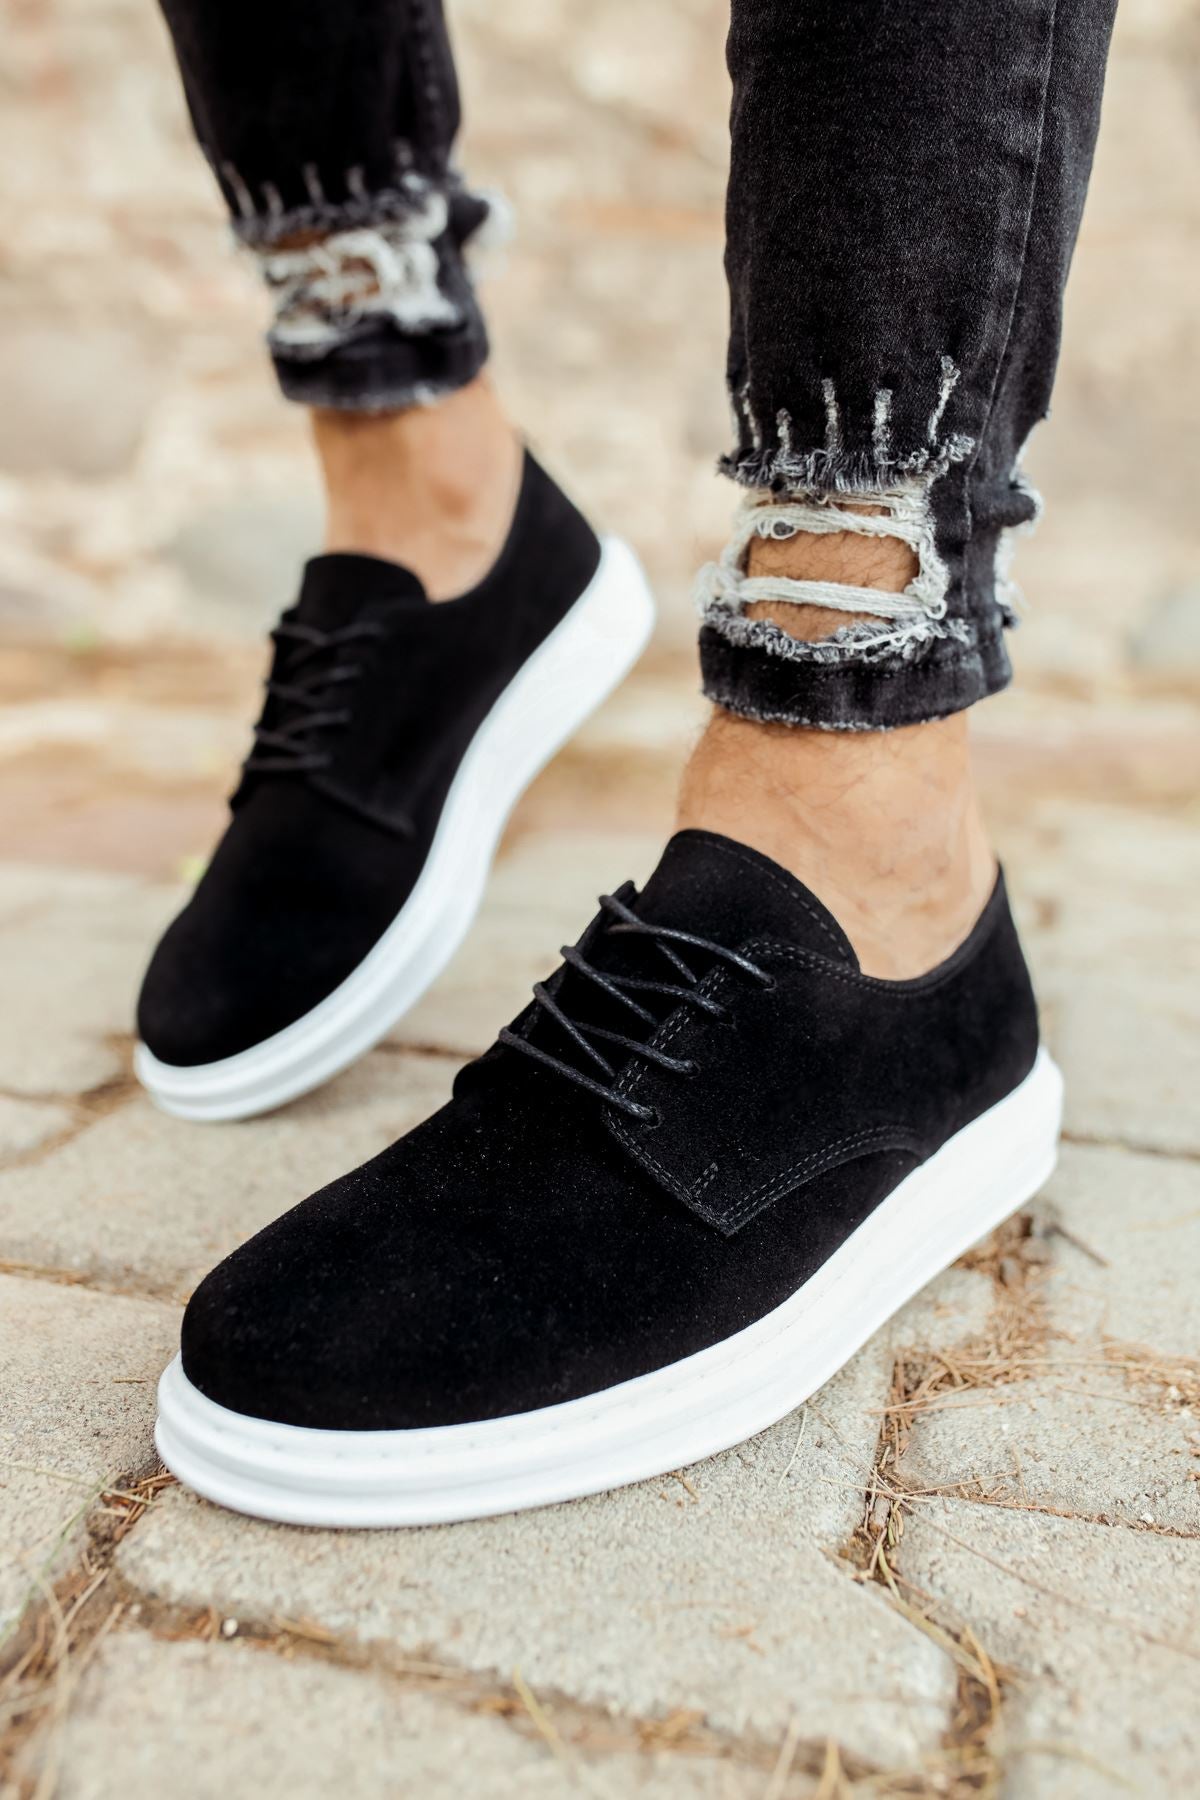 CH003 Suede BT Men's Sneaker Casual Shoes Black - STREETMODE™